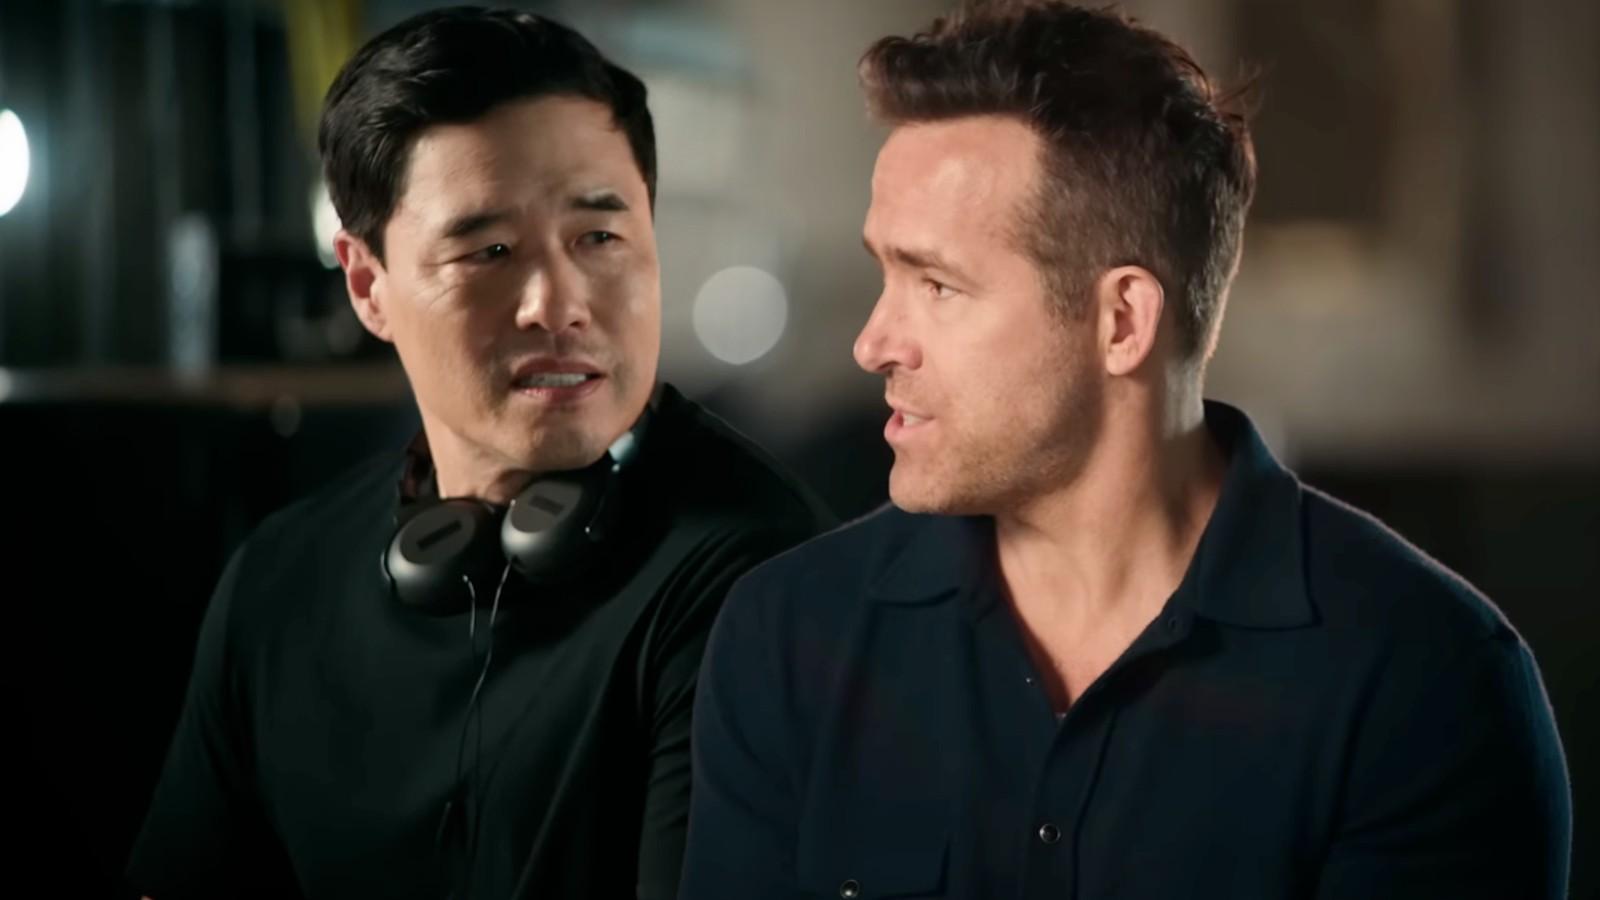 Randall Park and Ryan Reynolds in the new IF teaser